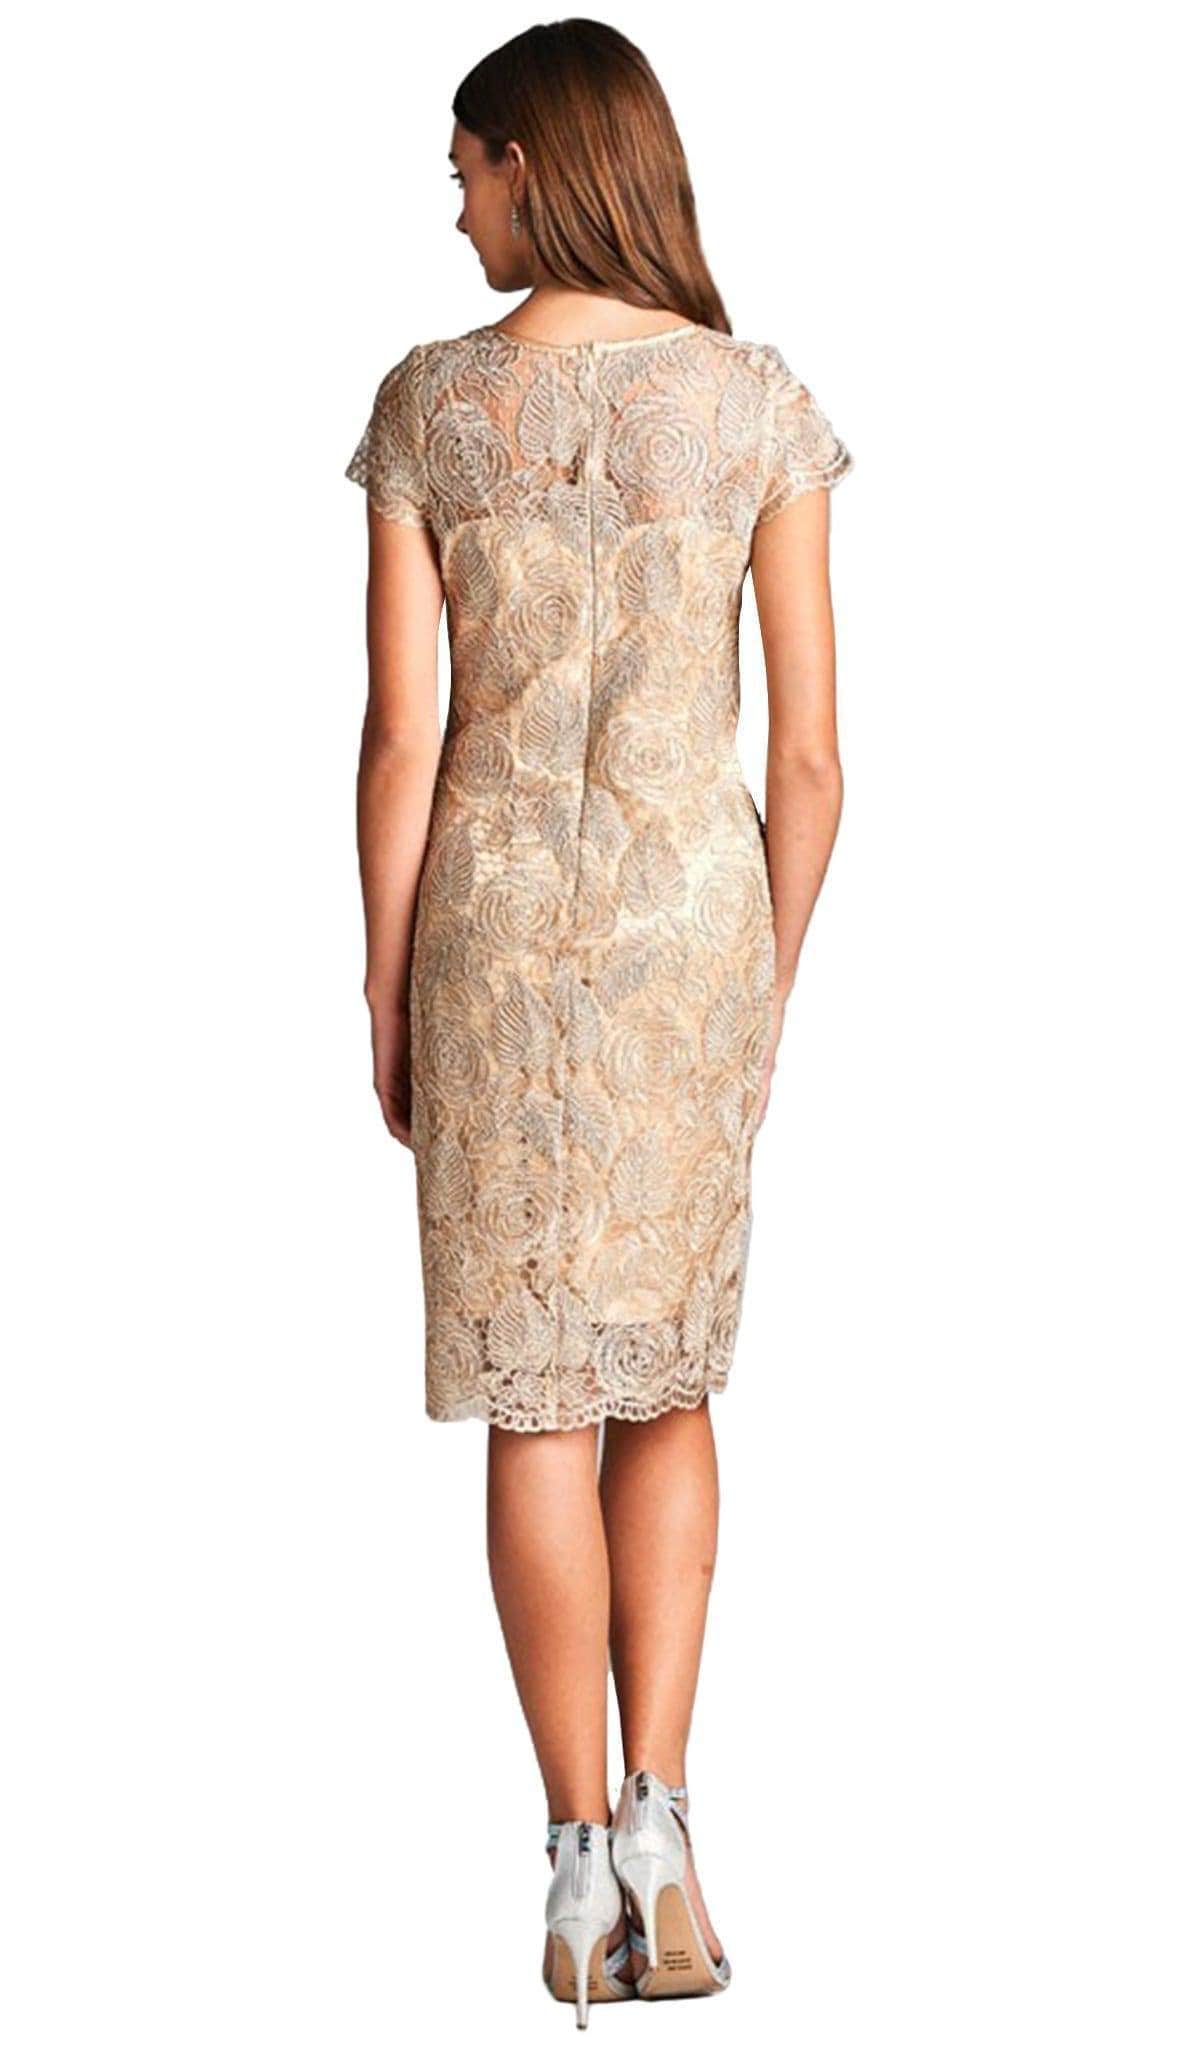 Aspeed Design, Aspeed Design - Floral Embossed Lace Cocktail Dress D109 - 1 pc Jade in Size XL Available